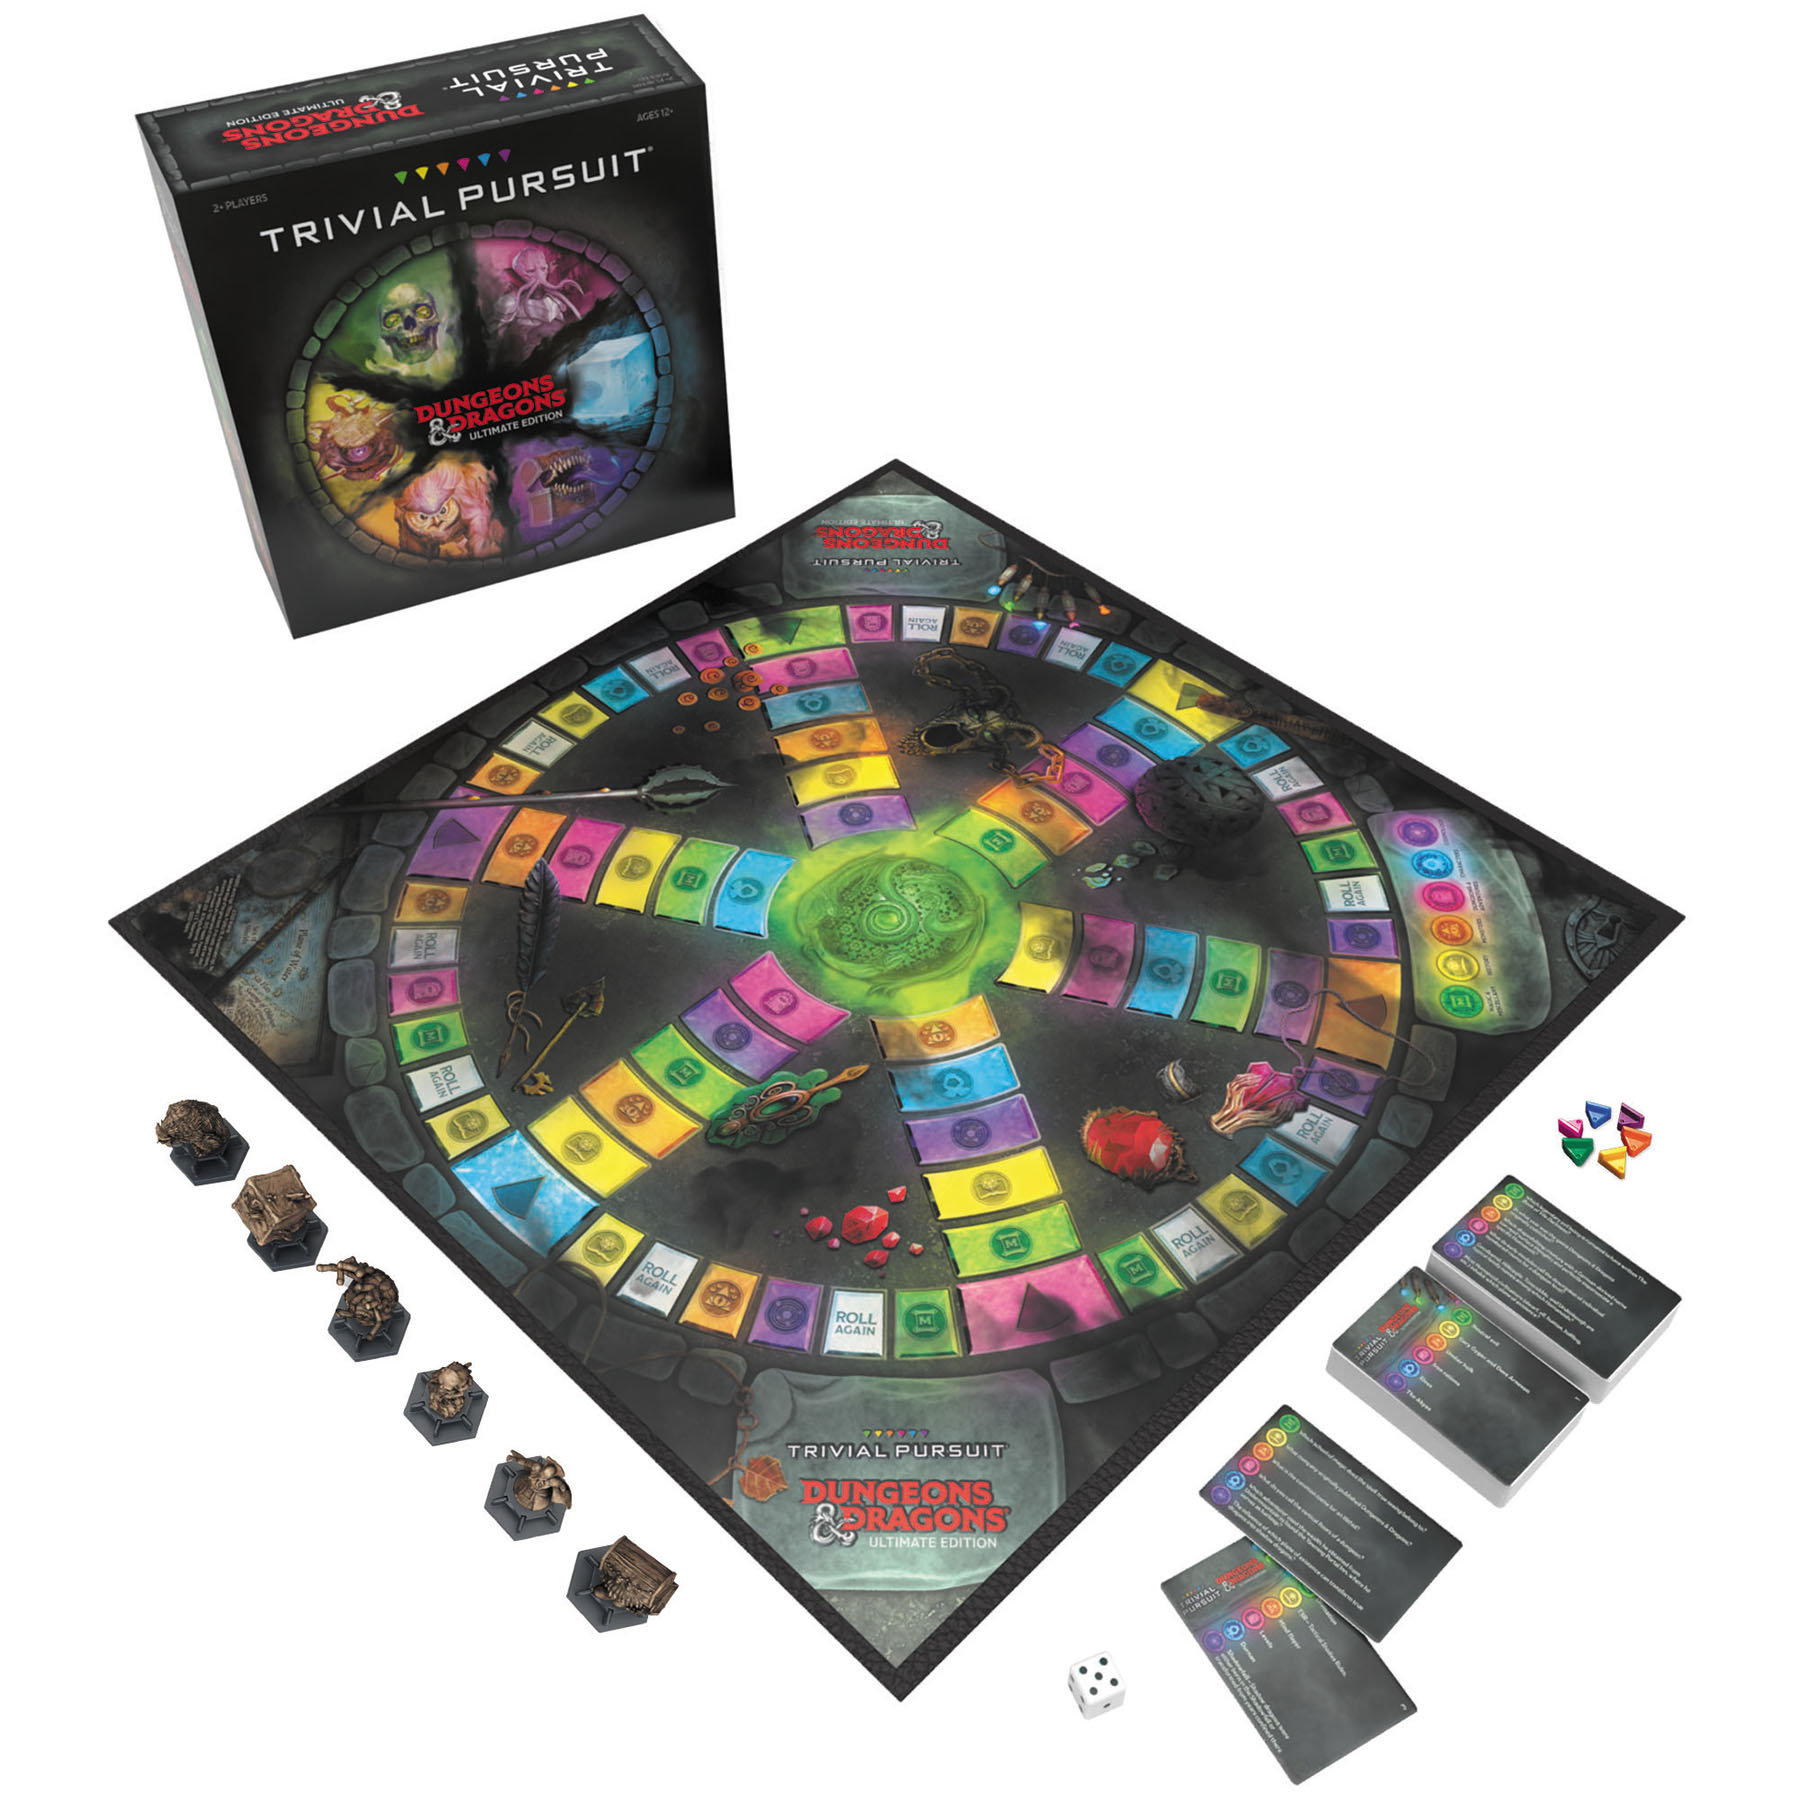 TRIVIAL PURSUIT TRIVIAL PURSUIT: Dungeons & Dragons Ultimate Edition image number null